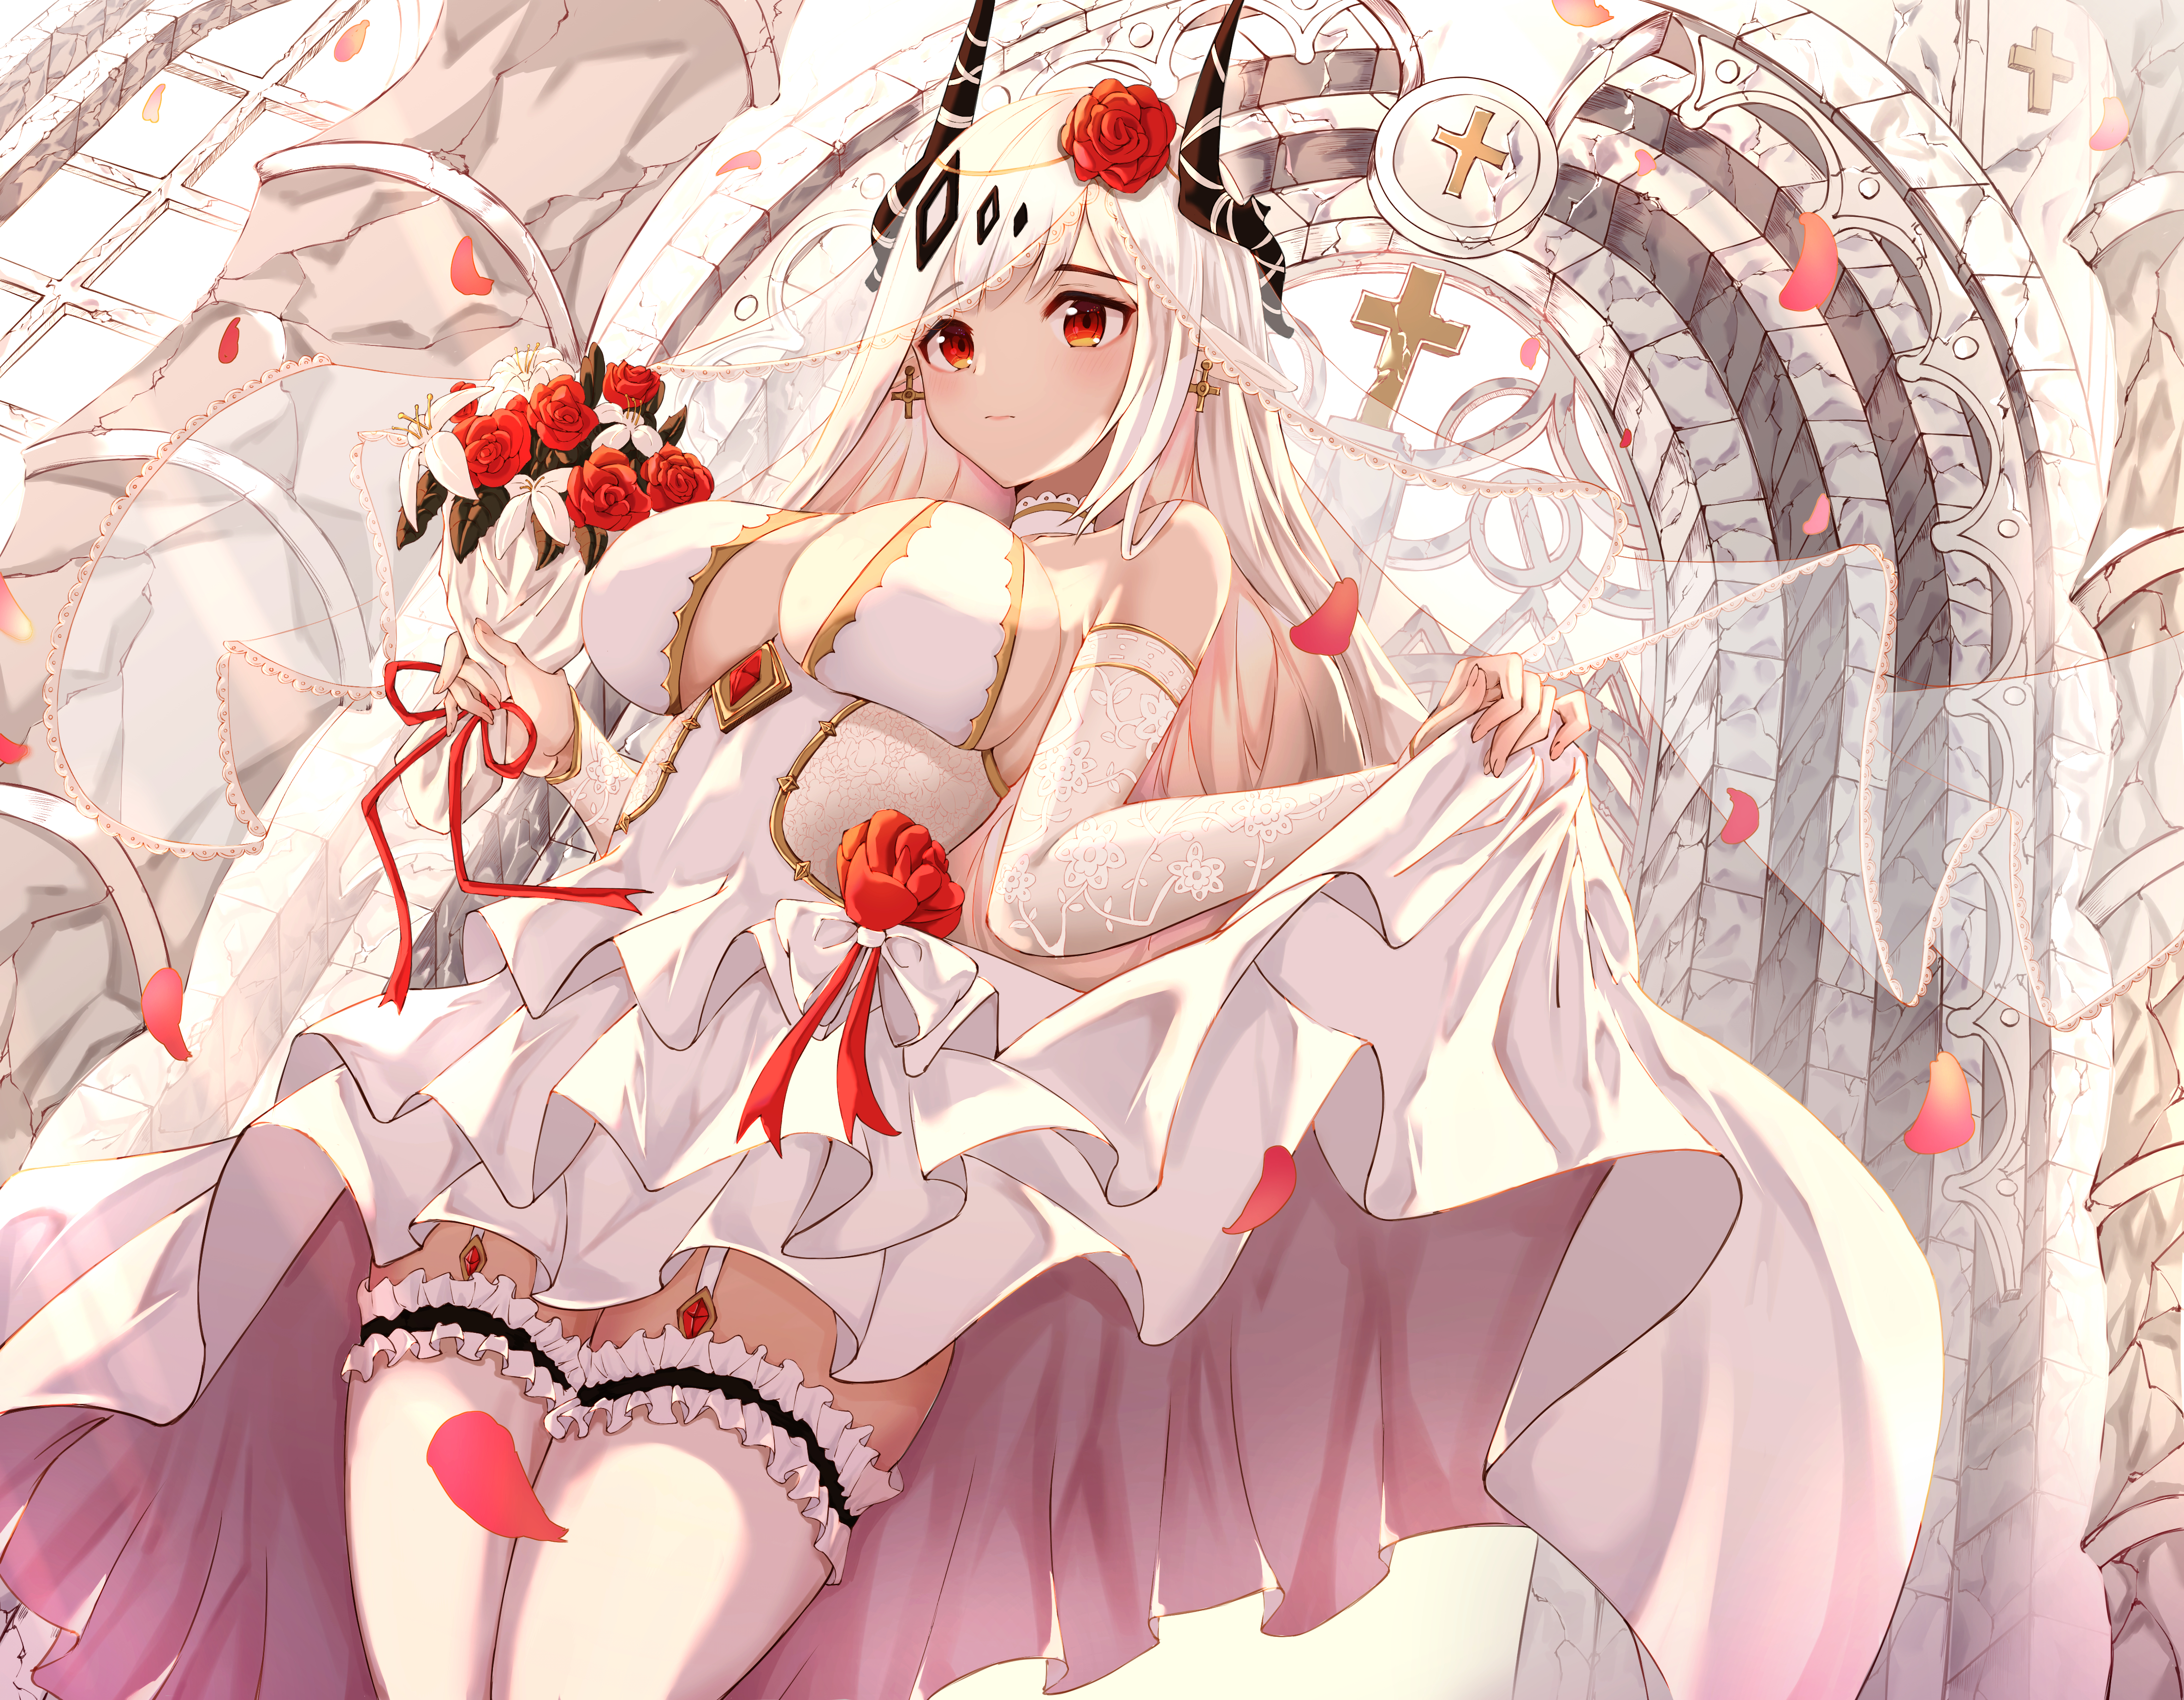 Arknights Mudrock Arknights White Dress White Hair Brides Red Eyes Lifting Dress Horns Anime Girls L 4736x3686